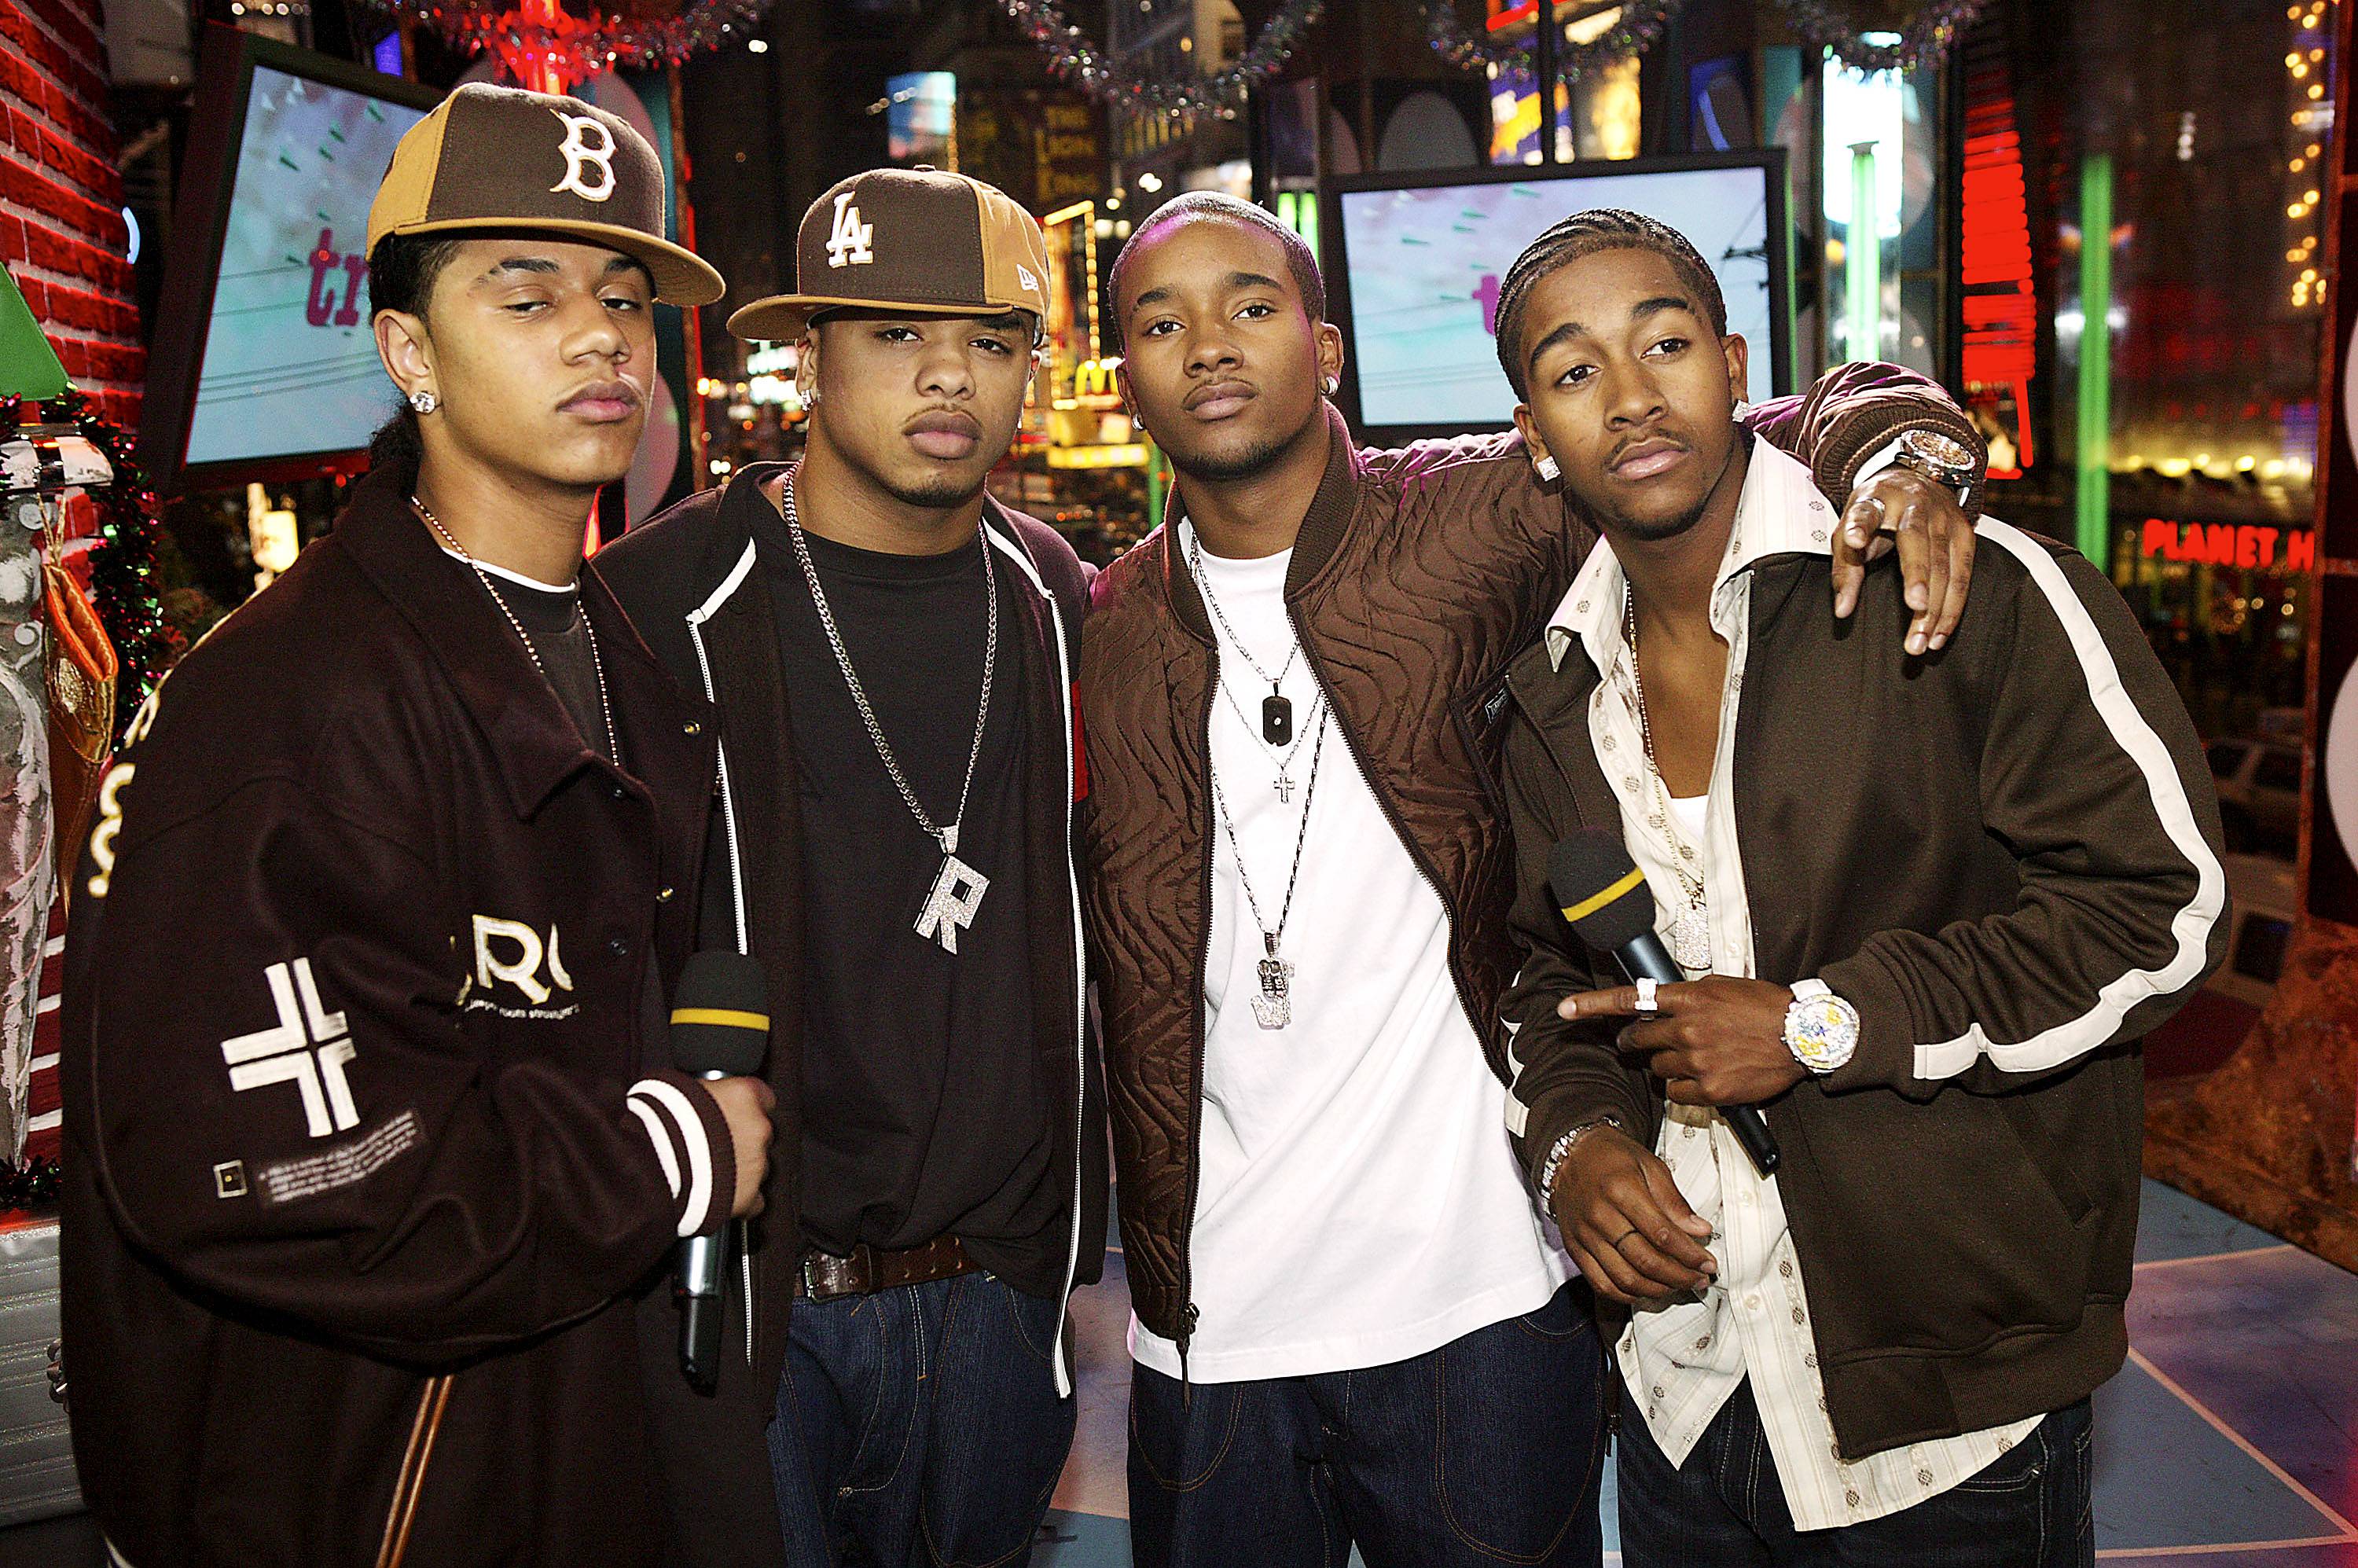 Fans Have Already Picked Out Their Outfits For Next Years B2k Reunion